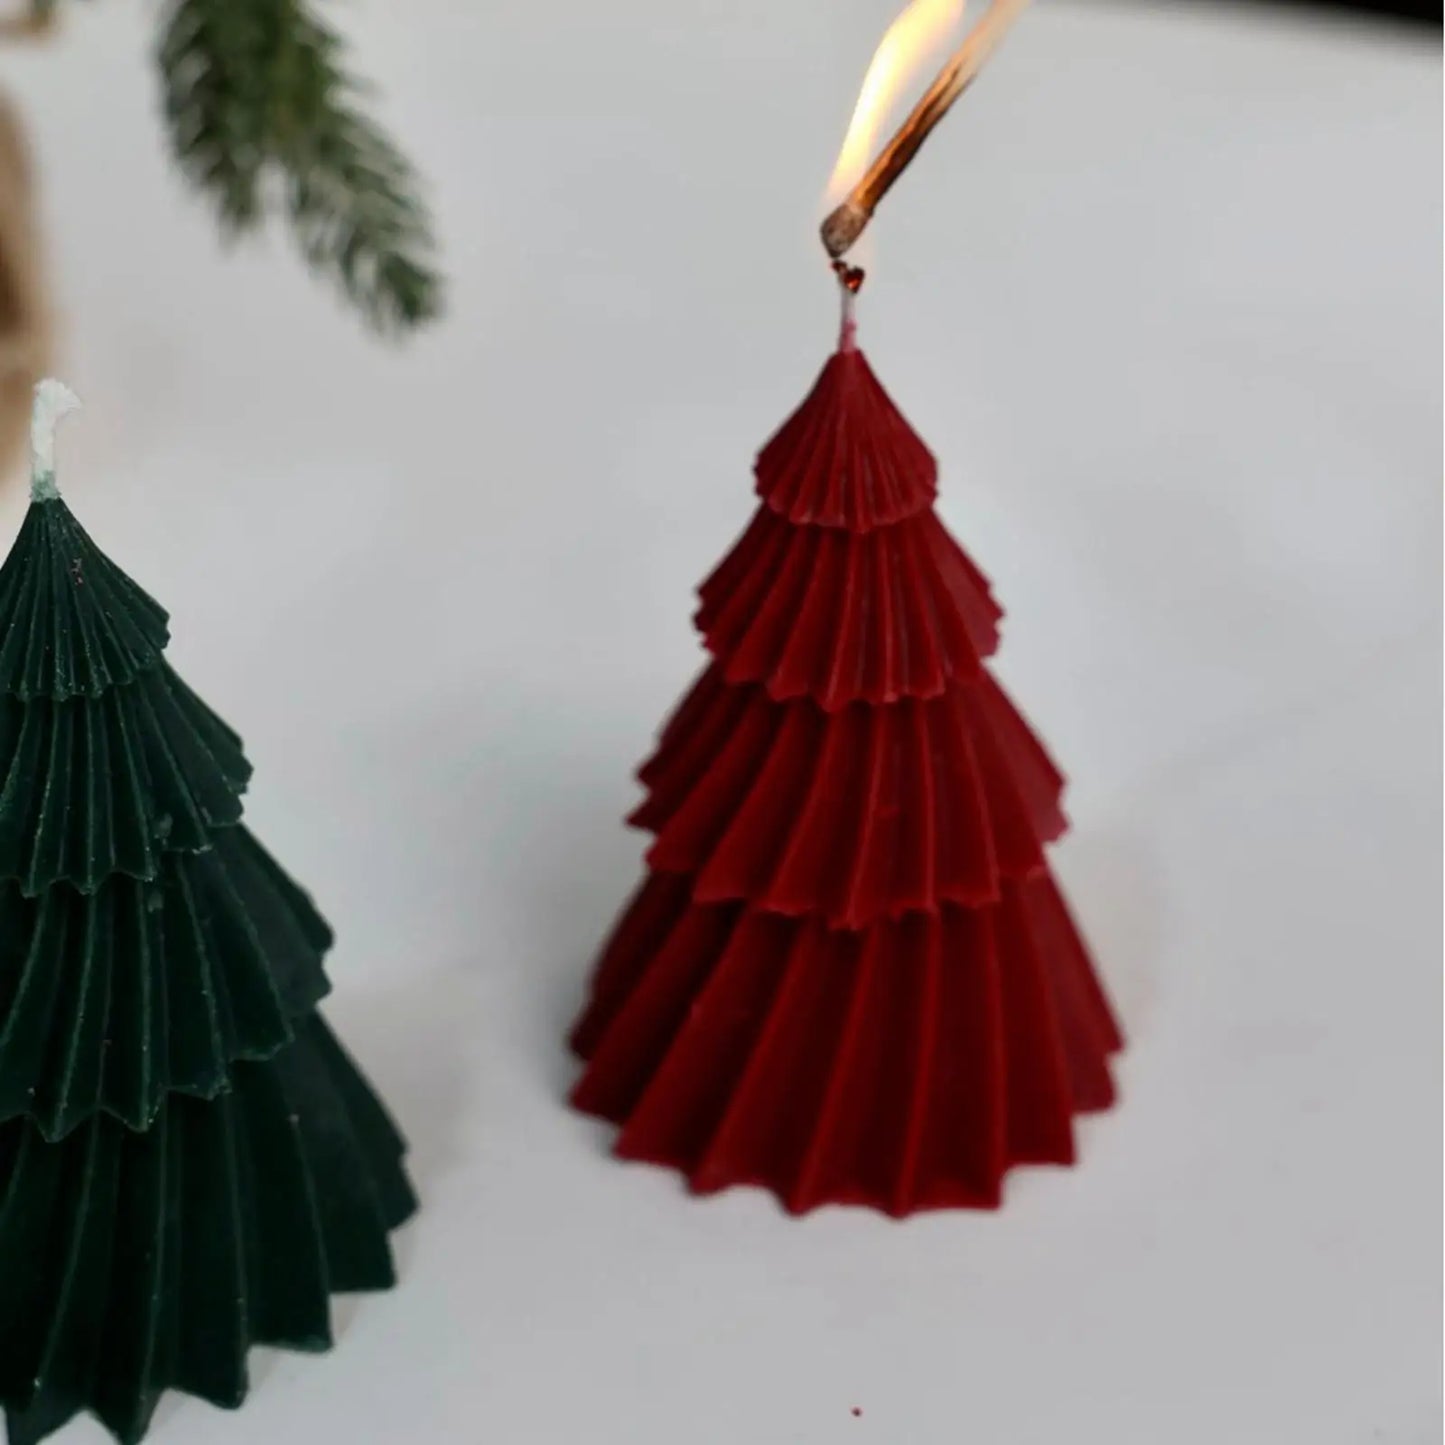 Christmas Tree Scented Candles - Rotating Shape, Holiday Gift Box